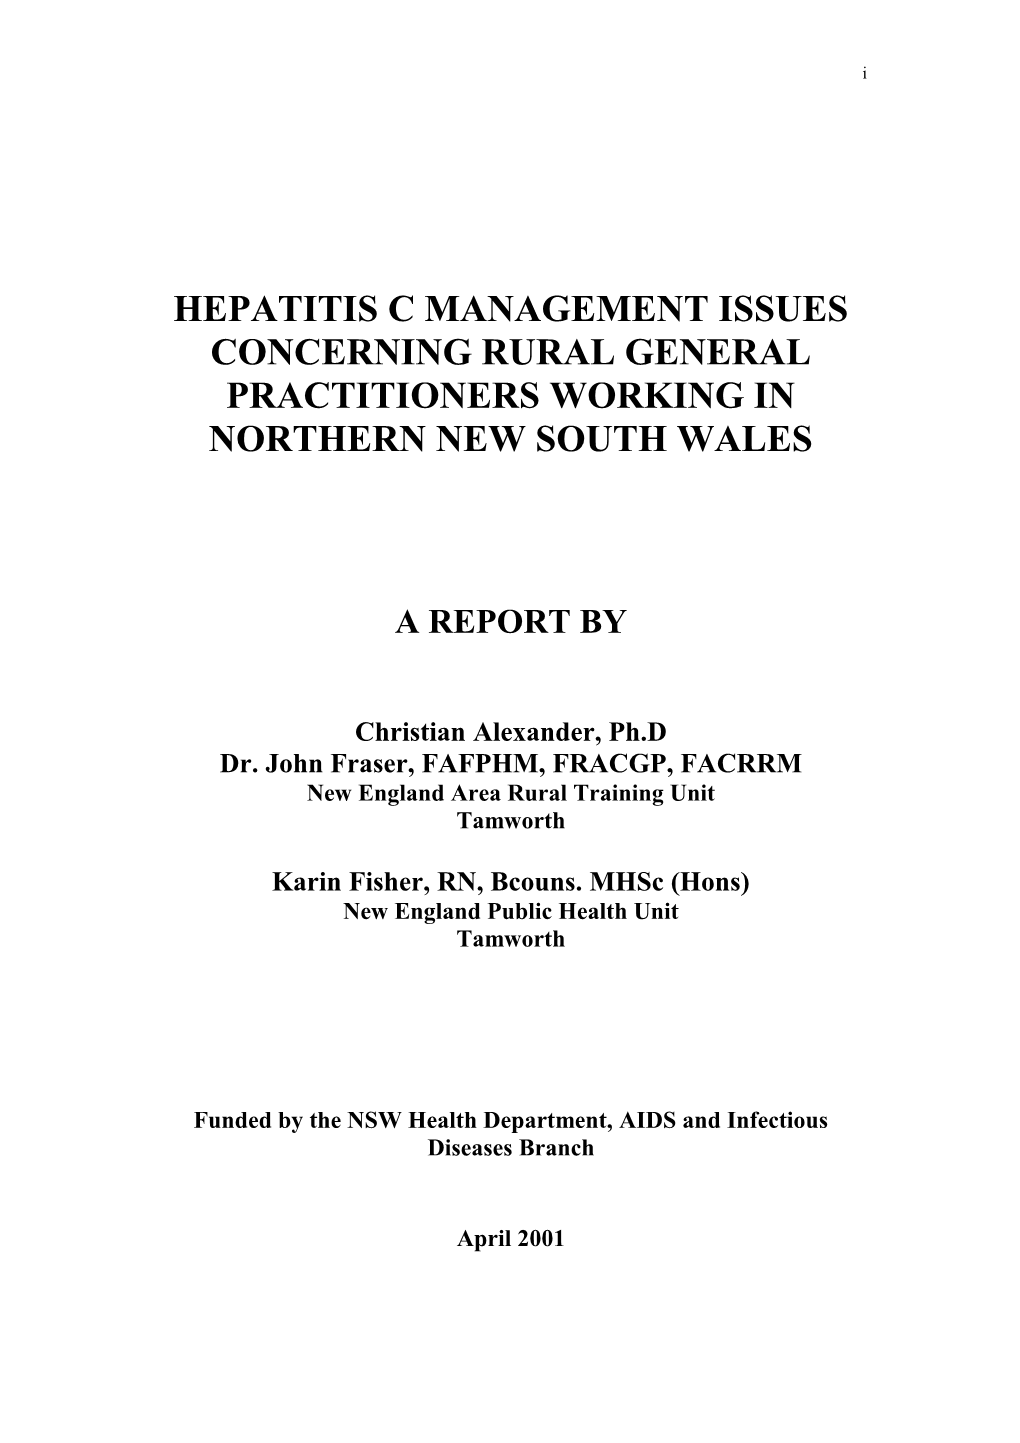 Hepatitis C Education Needs of Rural General Practitioners Working in Northern New South Wales